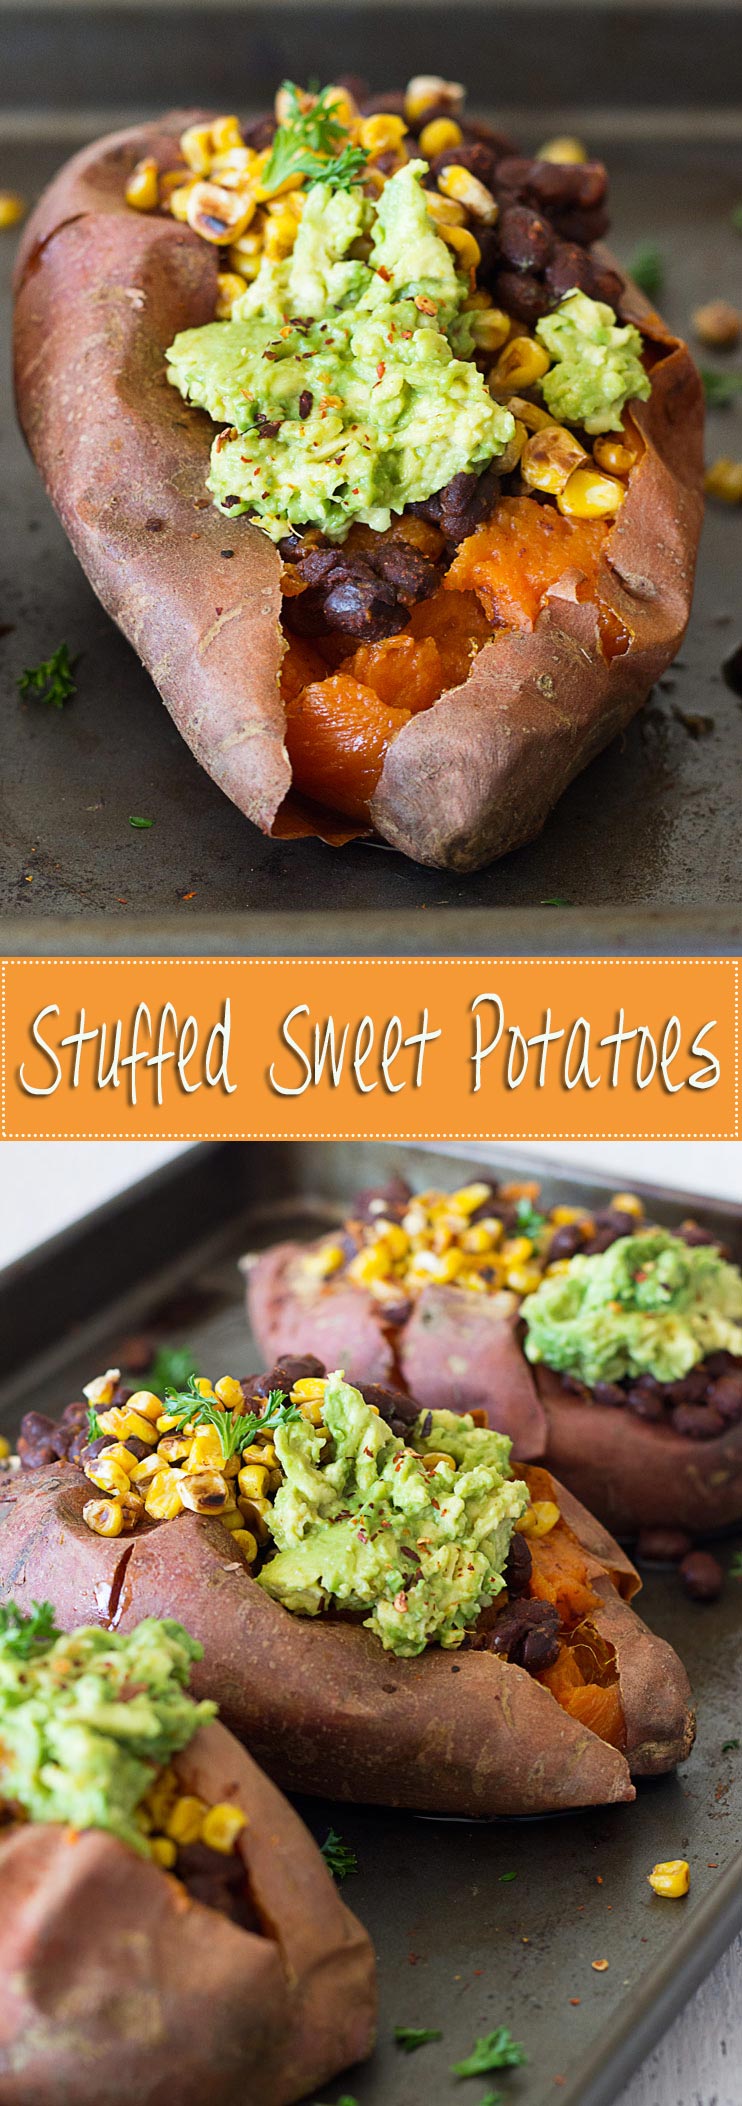 Charred Corn & Black Bean Stuffed Sweet Potatoes - the ultimate comfort food that is nourishing, wholesome, and incredibly delicious! From www.sprinkleofgreen.com 